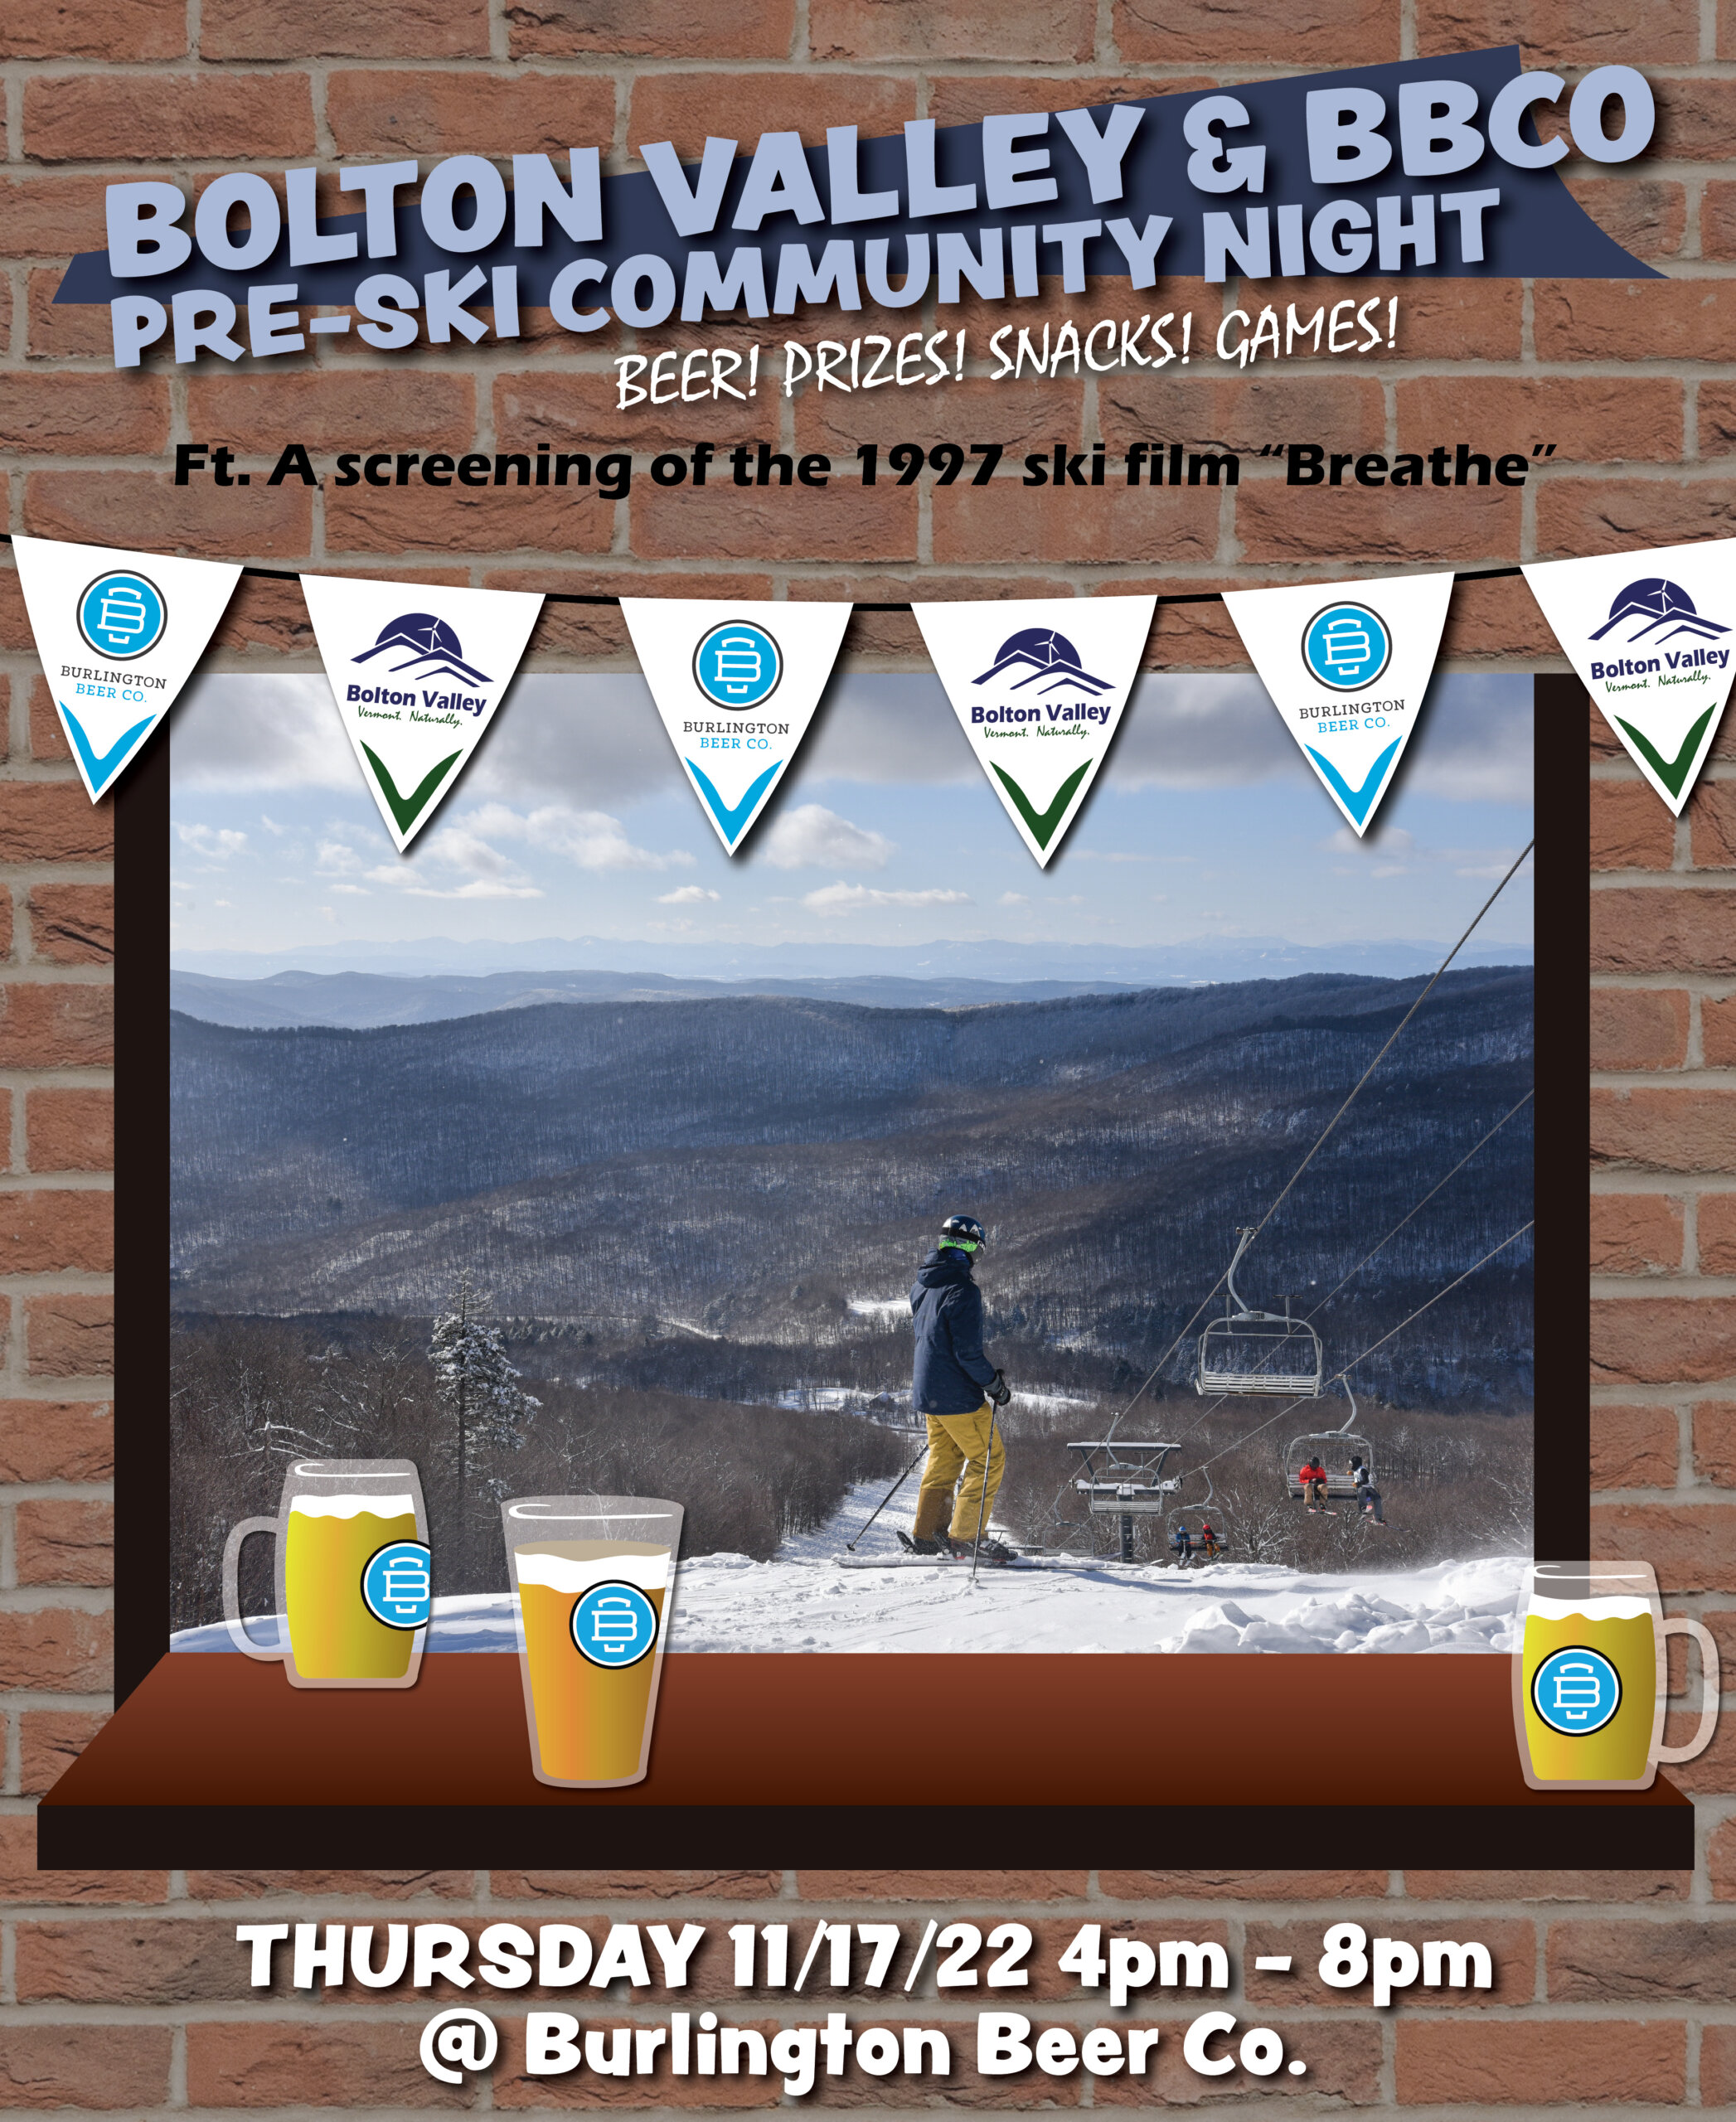 A Flyer for the Bolton Valley event at Burlington Beer Company